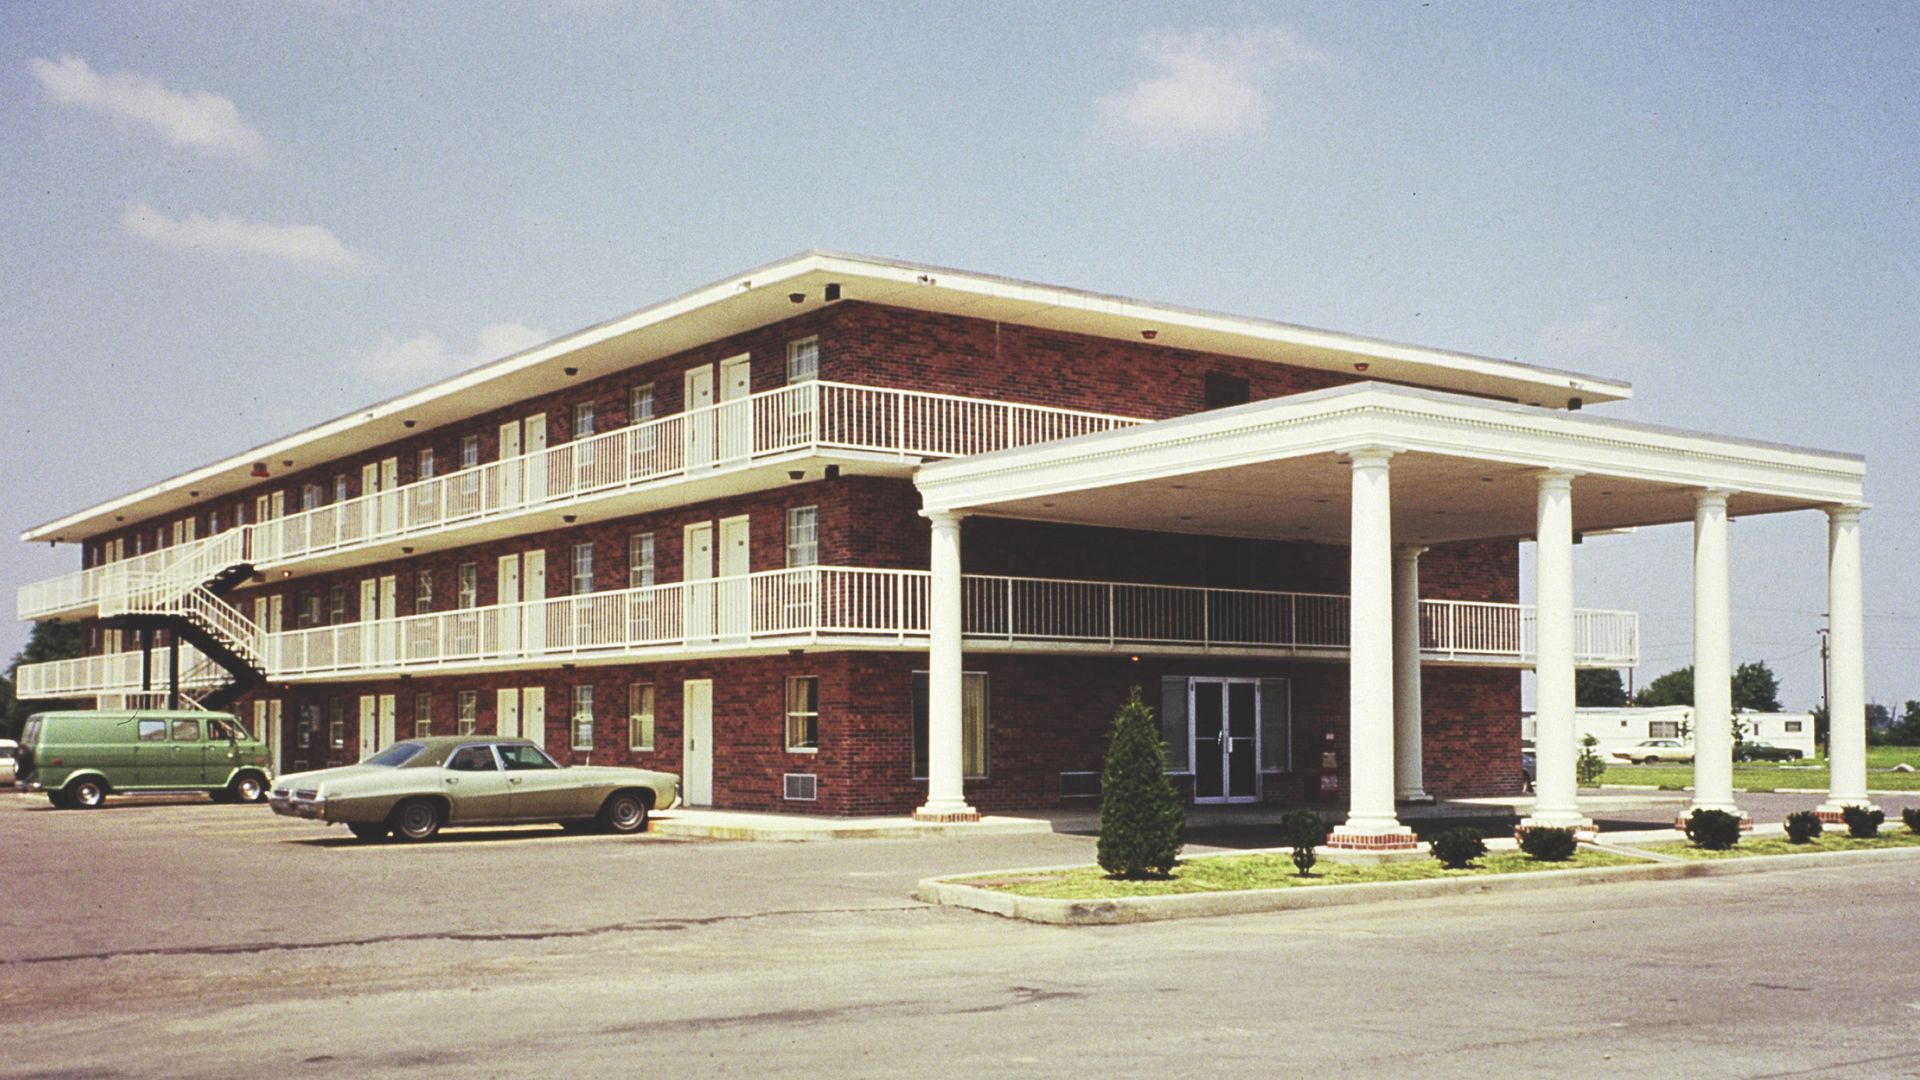 The first Drury Hotels property opened in Sikeston in 1973.